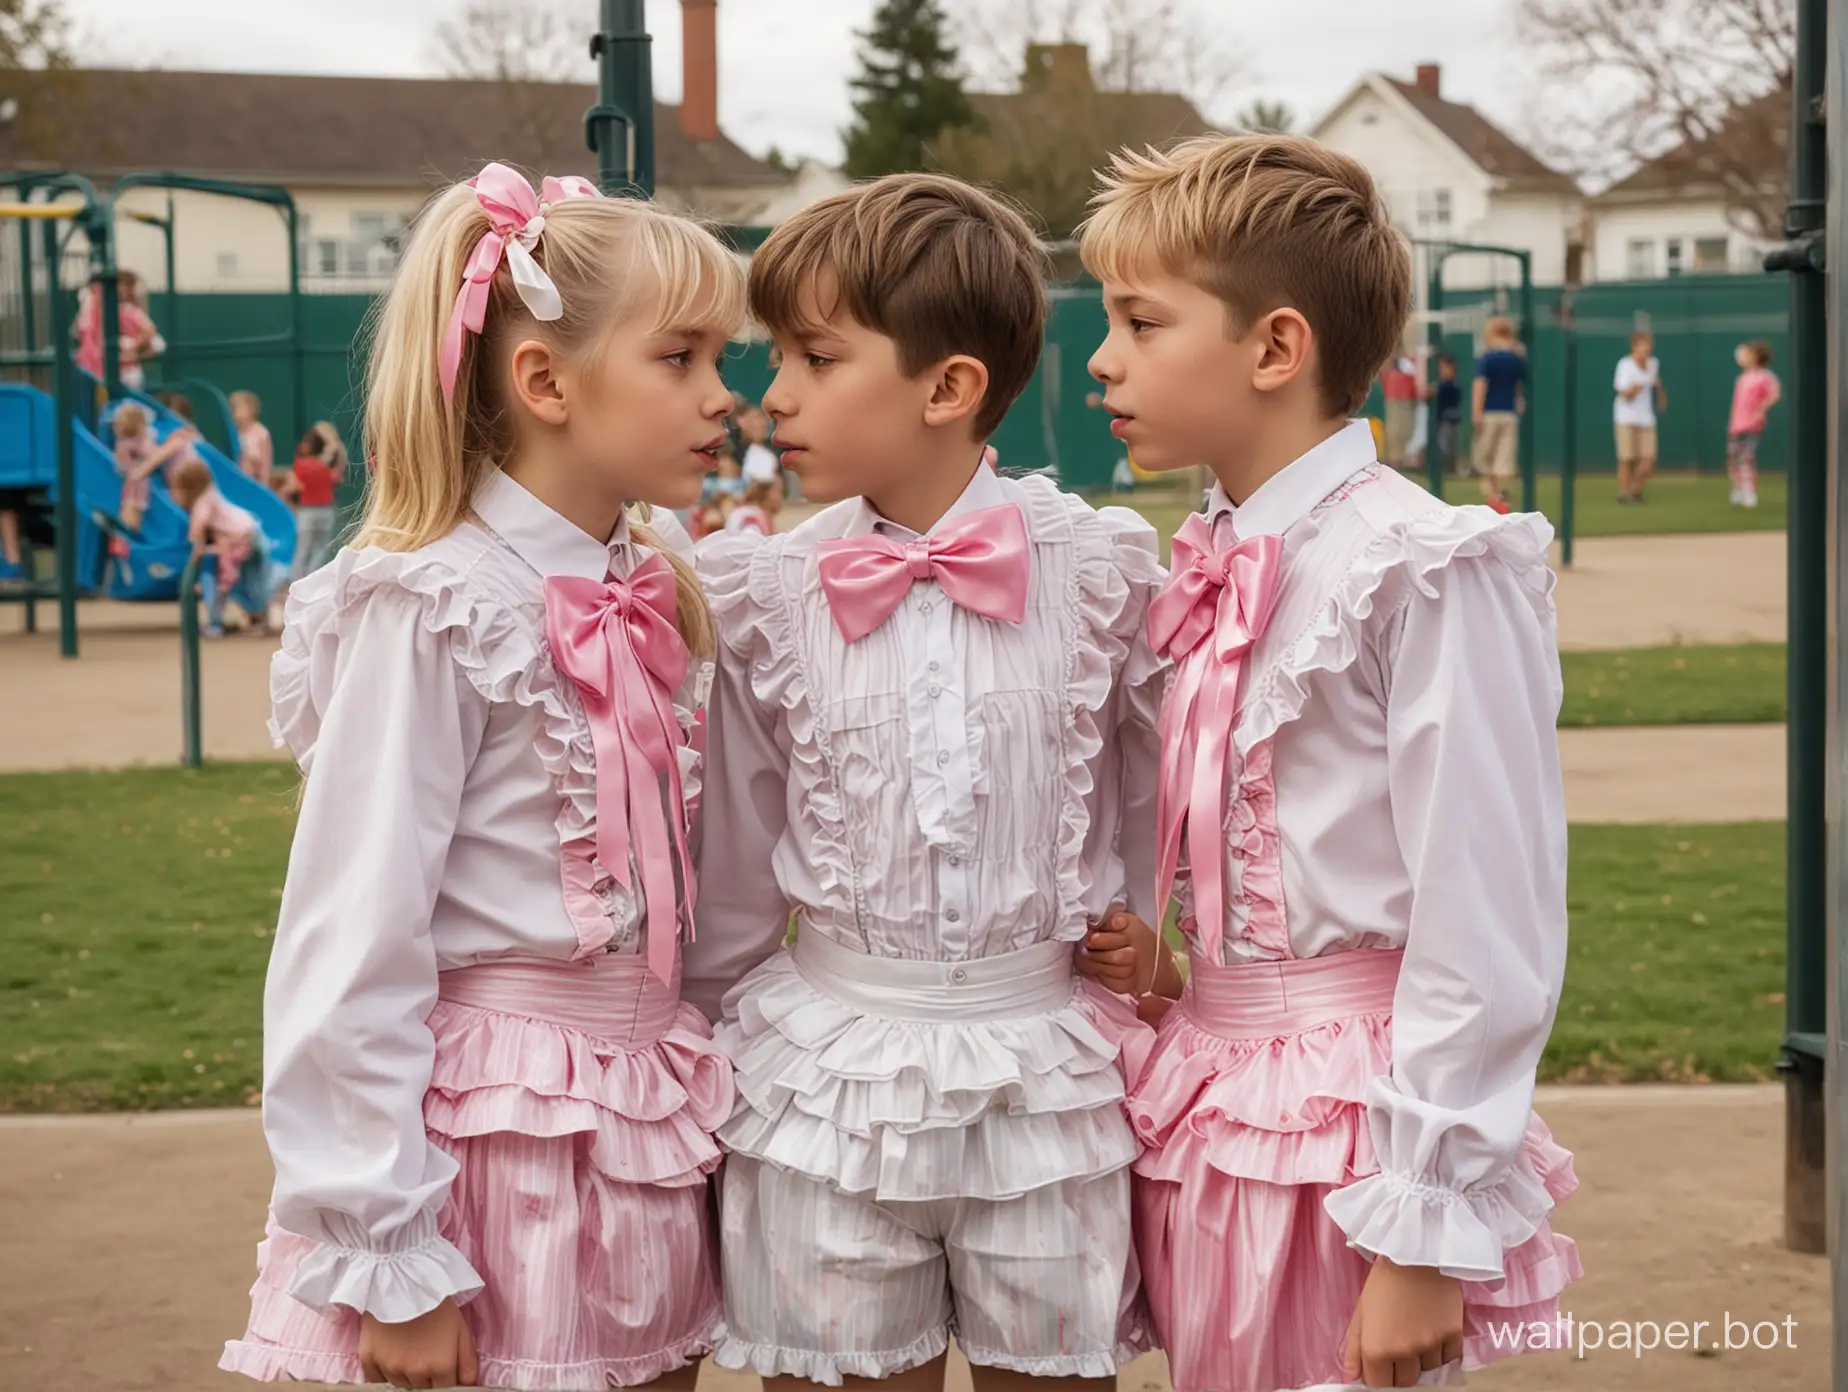 Two 12-year-old boys, dressed up as a sissy girl, standing on the schoolyard. They are wearing frilly dresses, colorful leggings, and their hair is elegantly styled with ribbons and bows. The boys, who appear to be best friends, are inseparable despite their gender-bending antics. Their faces are painted with light makeup, enhancing their feminine features. The background shows several other students in the distance, some of whom are staring at the boys in amusement, while others seem indifferent. In the foreground, the two boys are locked in a passionate kiss, their lips pressing against each other as they share a secret moment on the playground. The image captures a playful and innocent side of their relationship, as they explore their identities and emotions without fear of judgment.